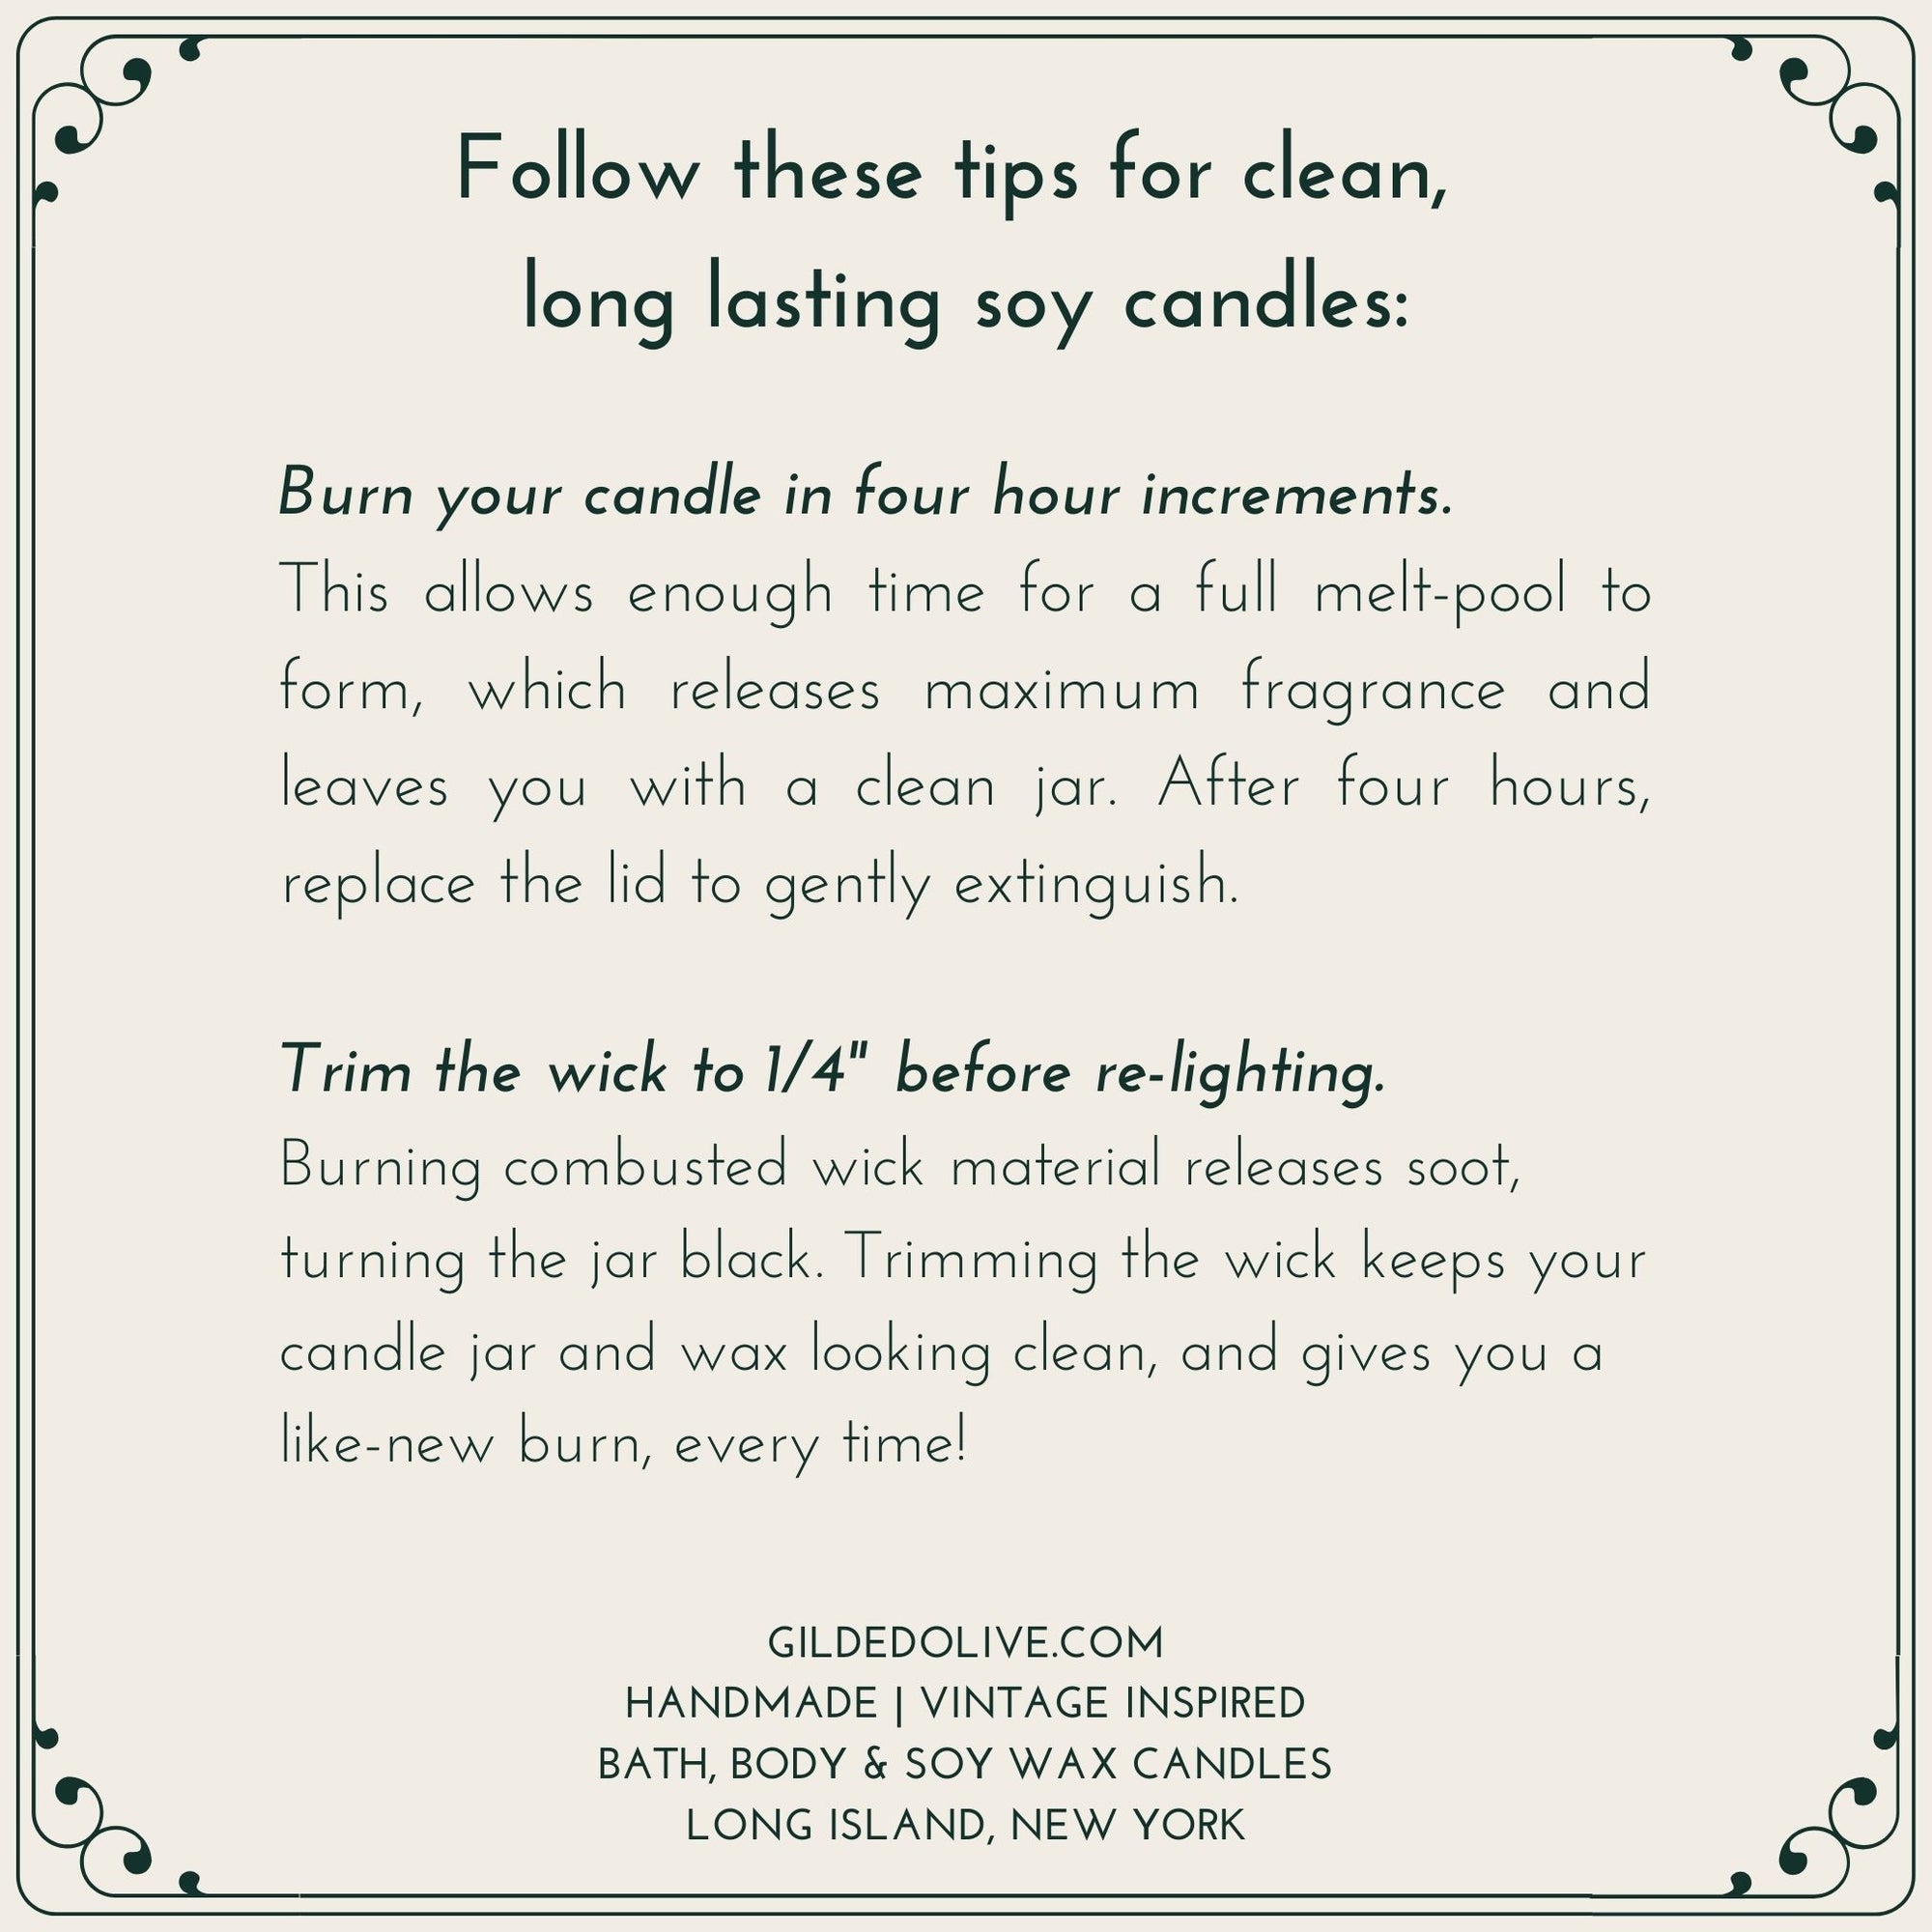 Two Tips for a clean burning candle